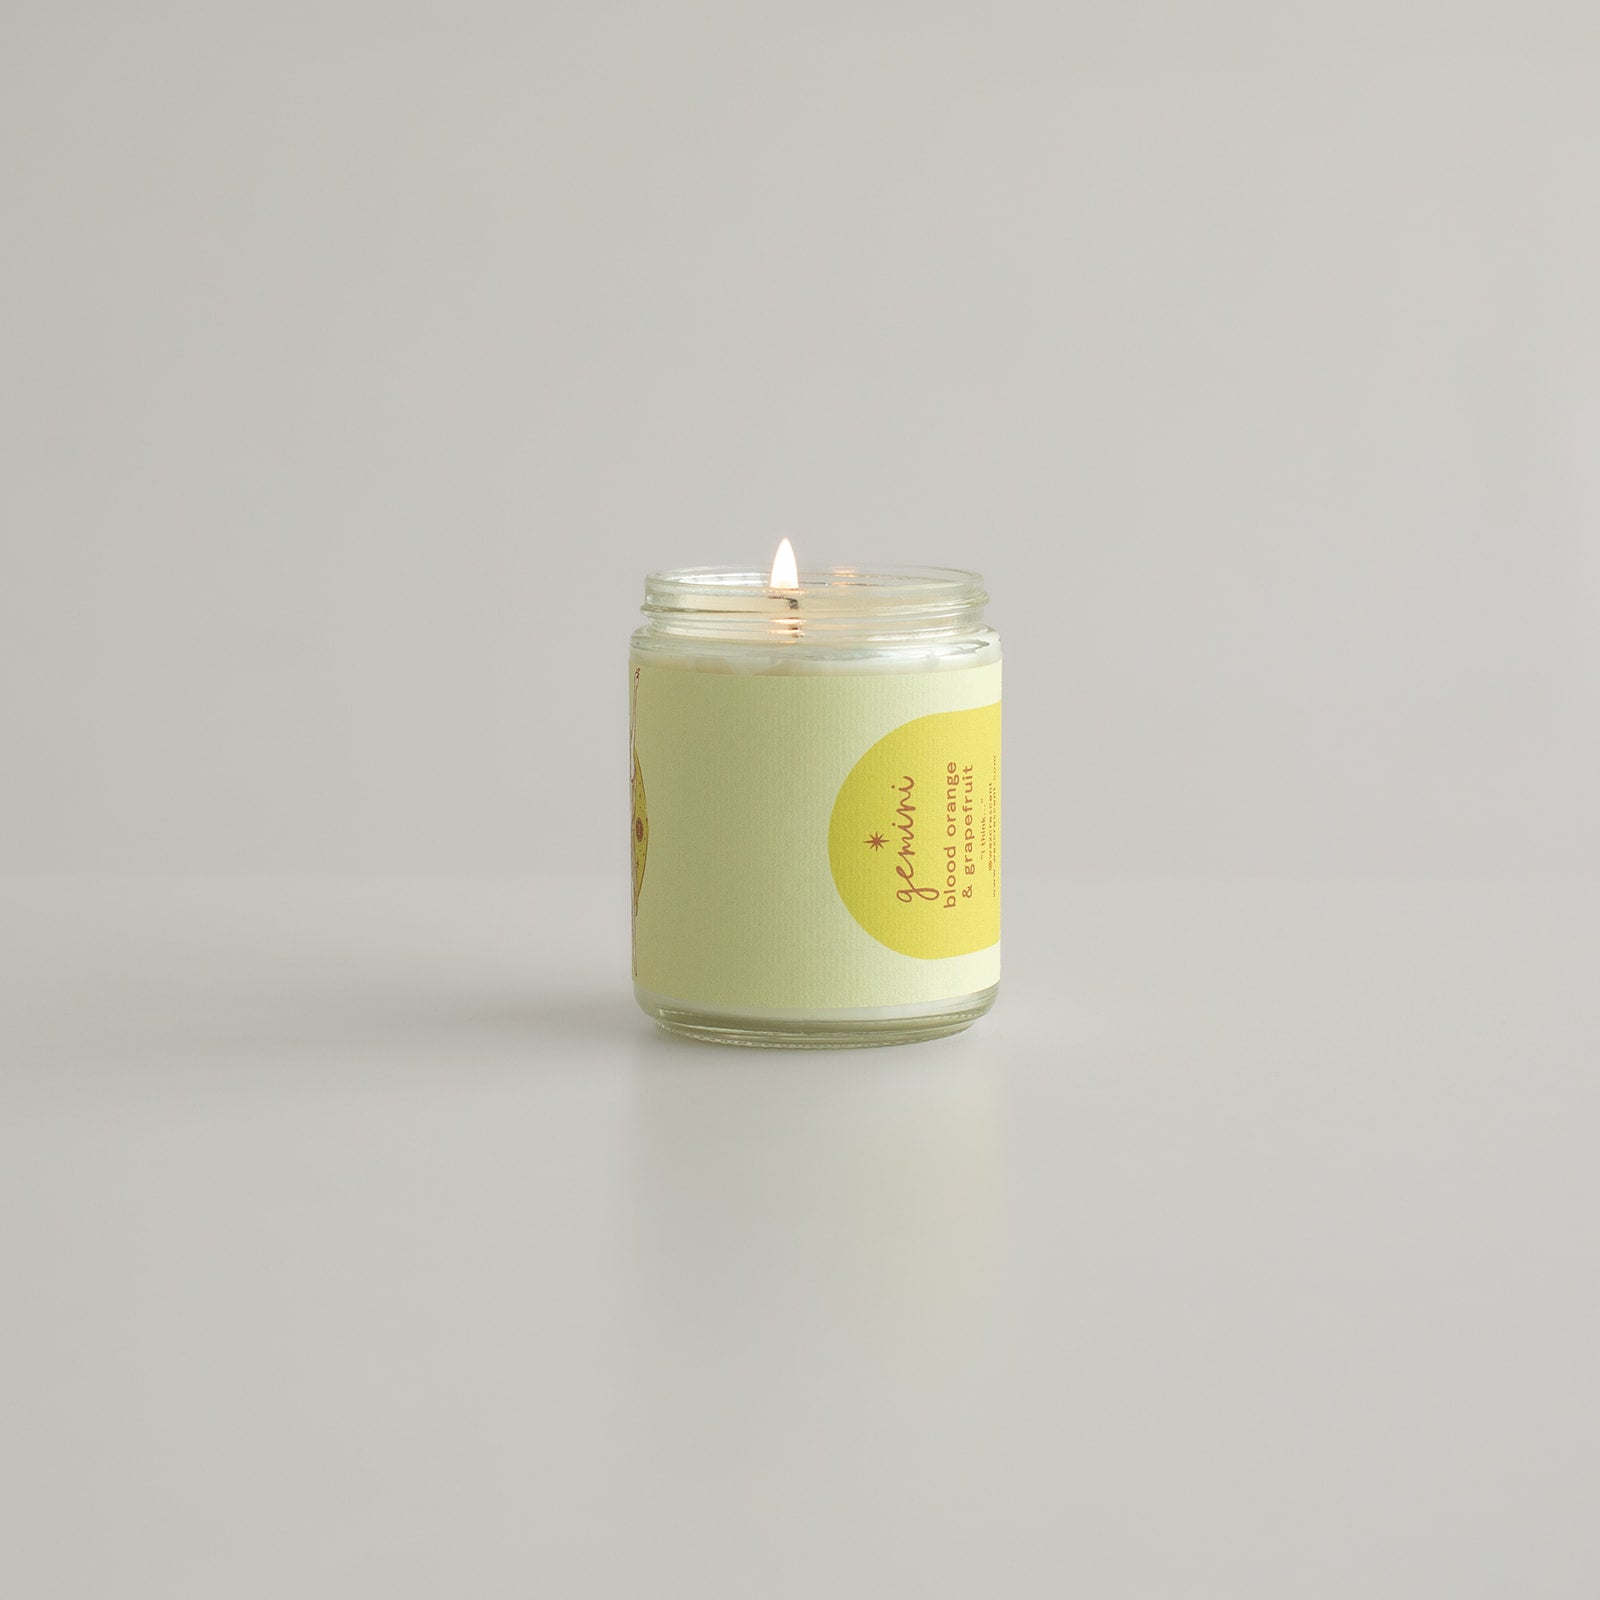 gemini zodiac candle for this astrology sign in a jar with yellow and orange label featuring gemini twins